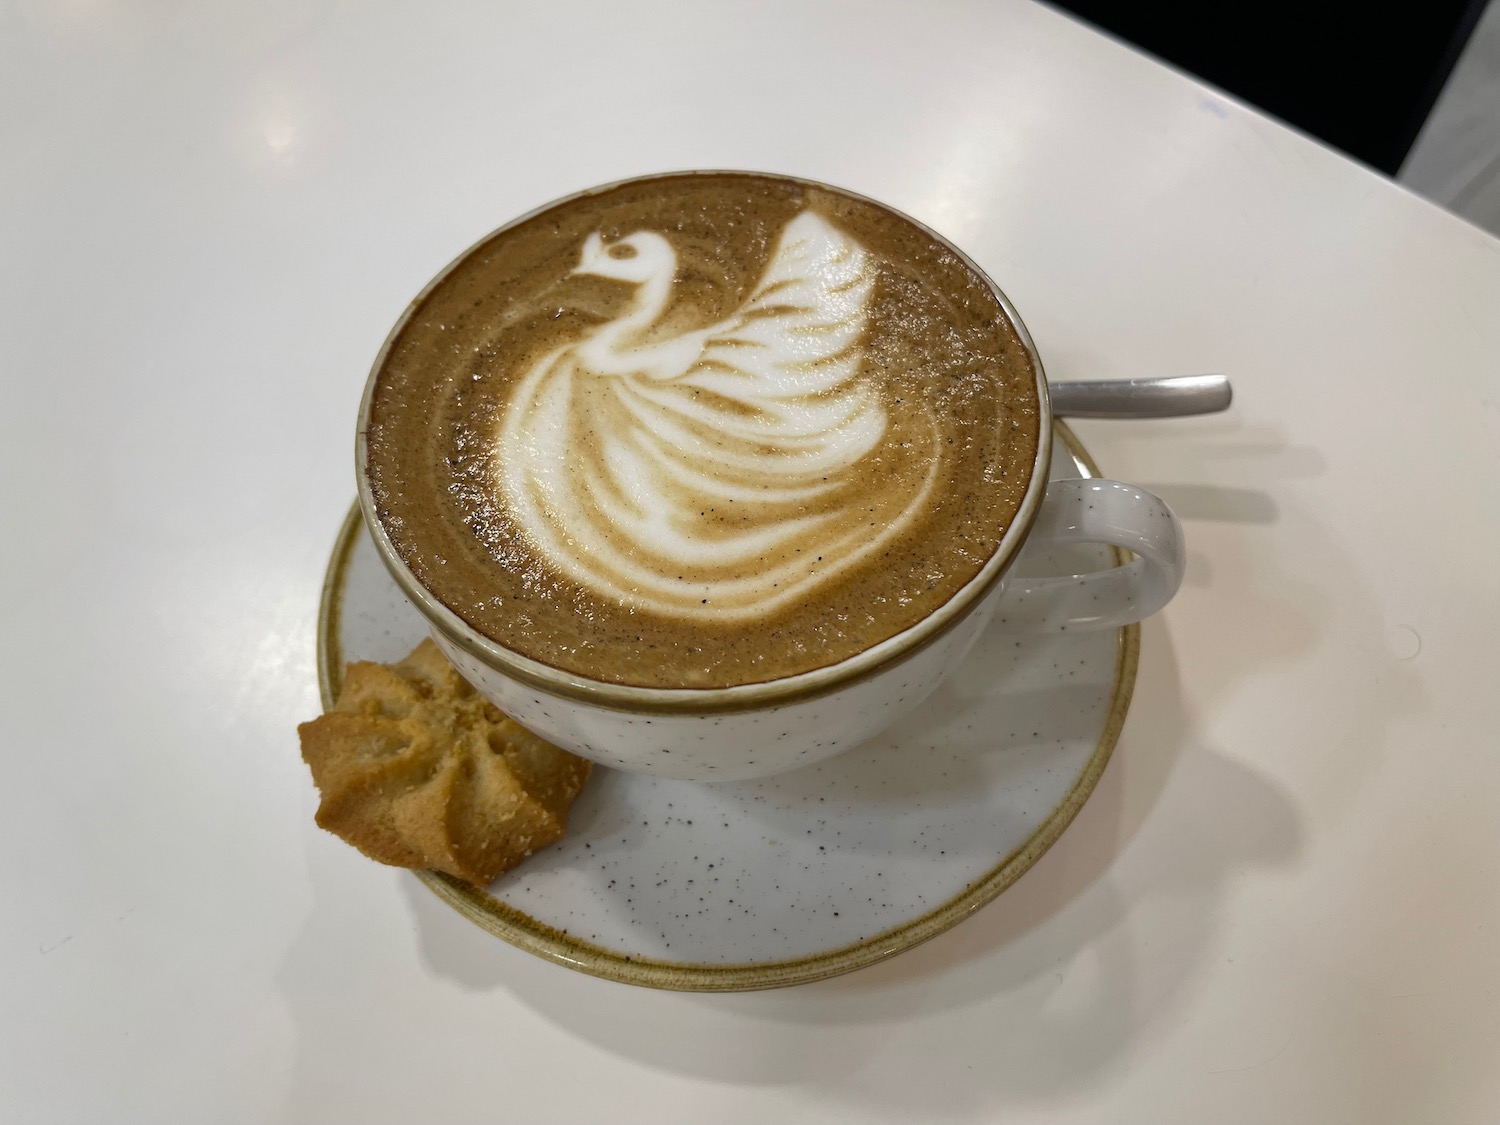 a cup of coffee with a swan design on top